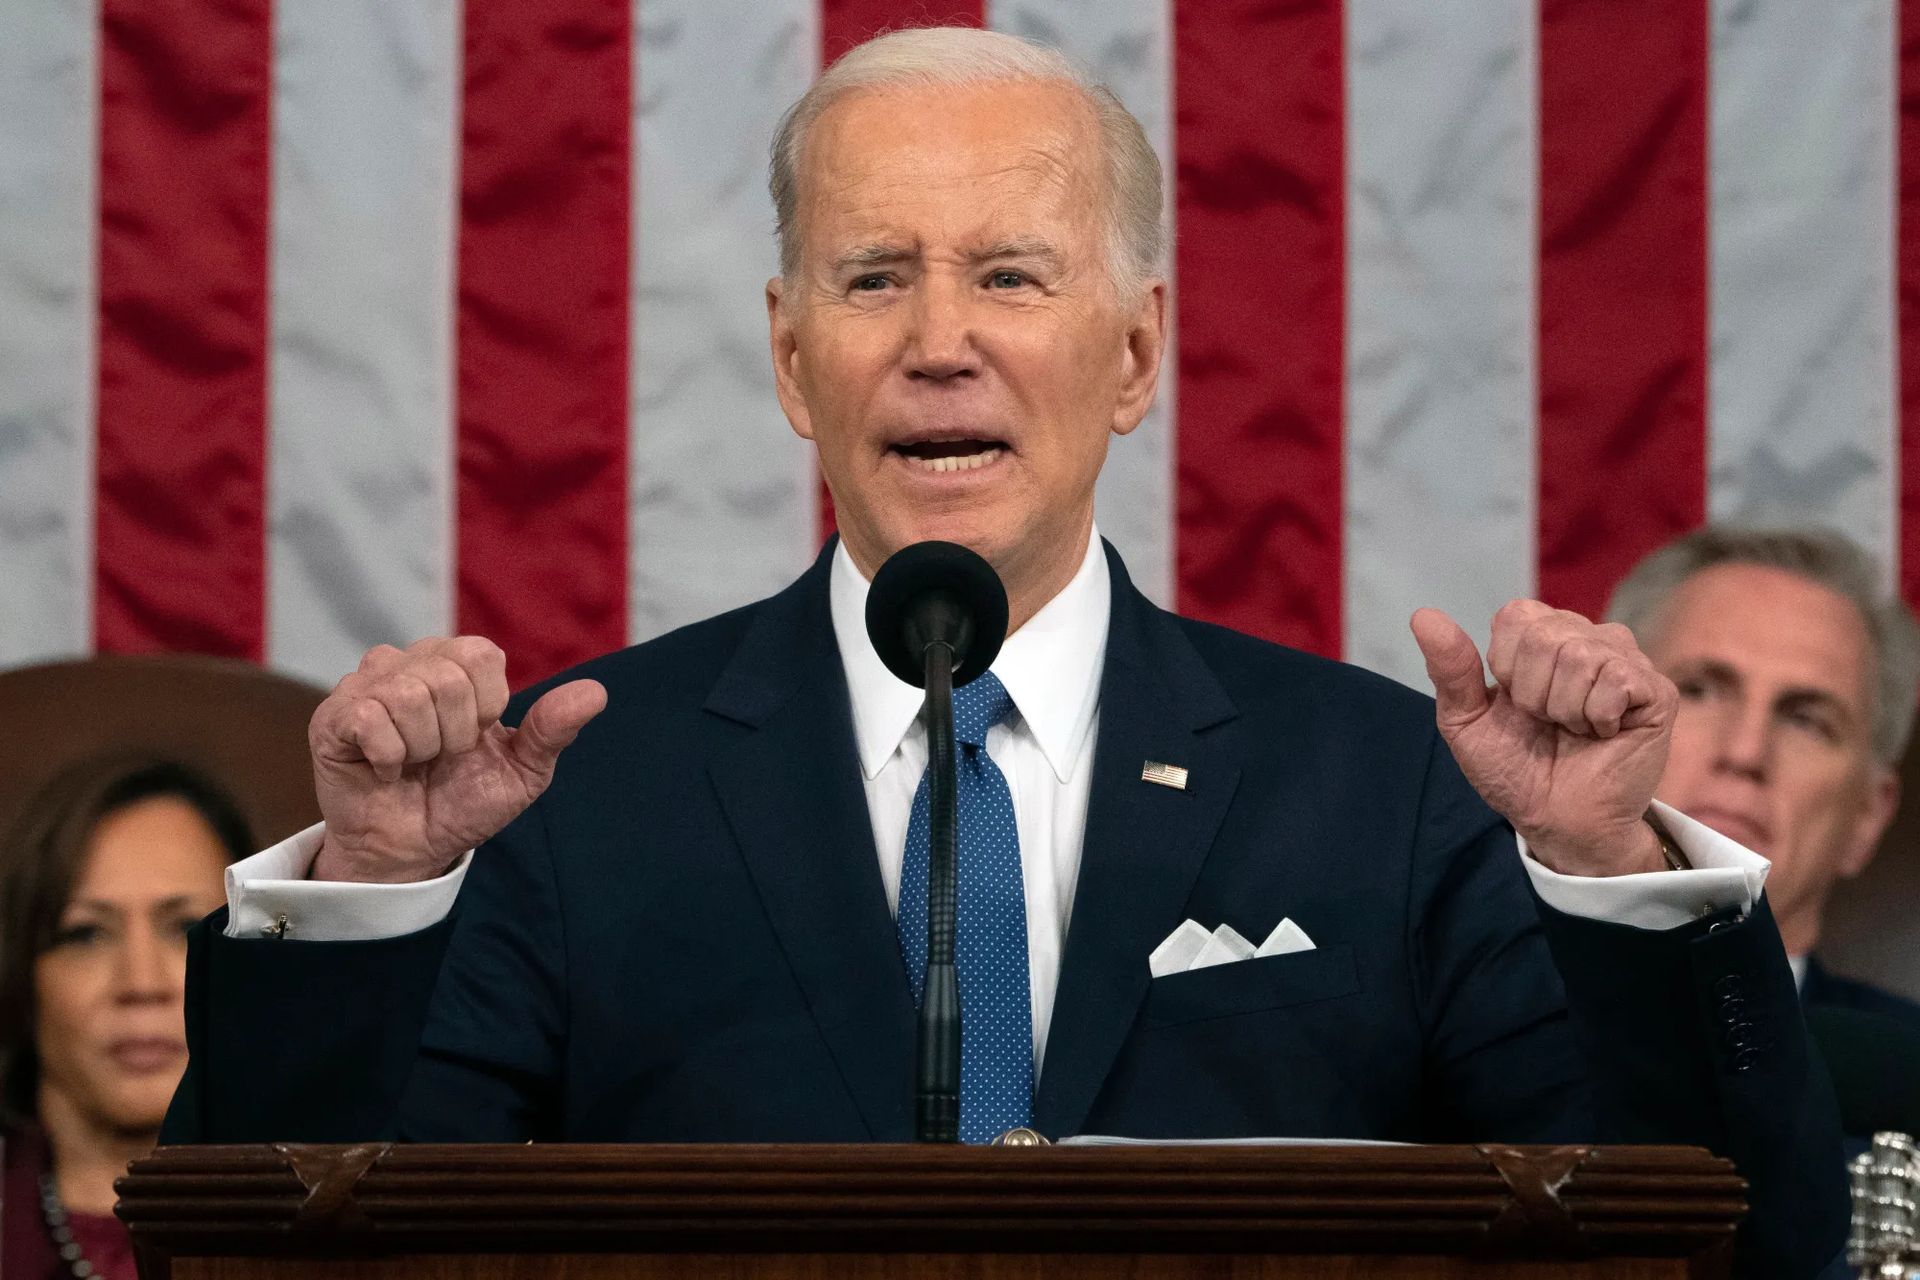 Joe Biden proposes crypto taxation changes in new budget plan